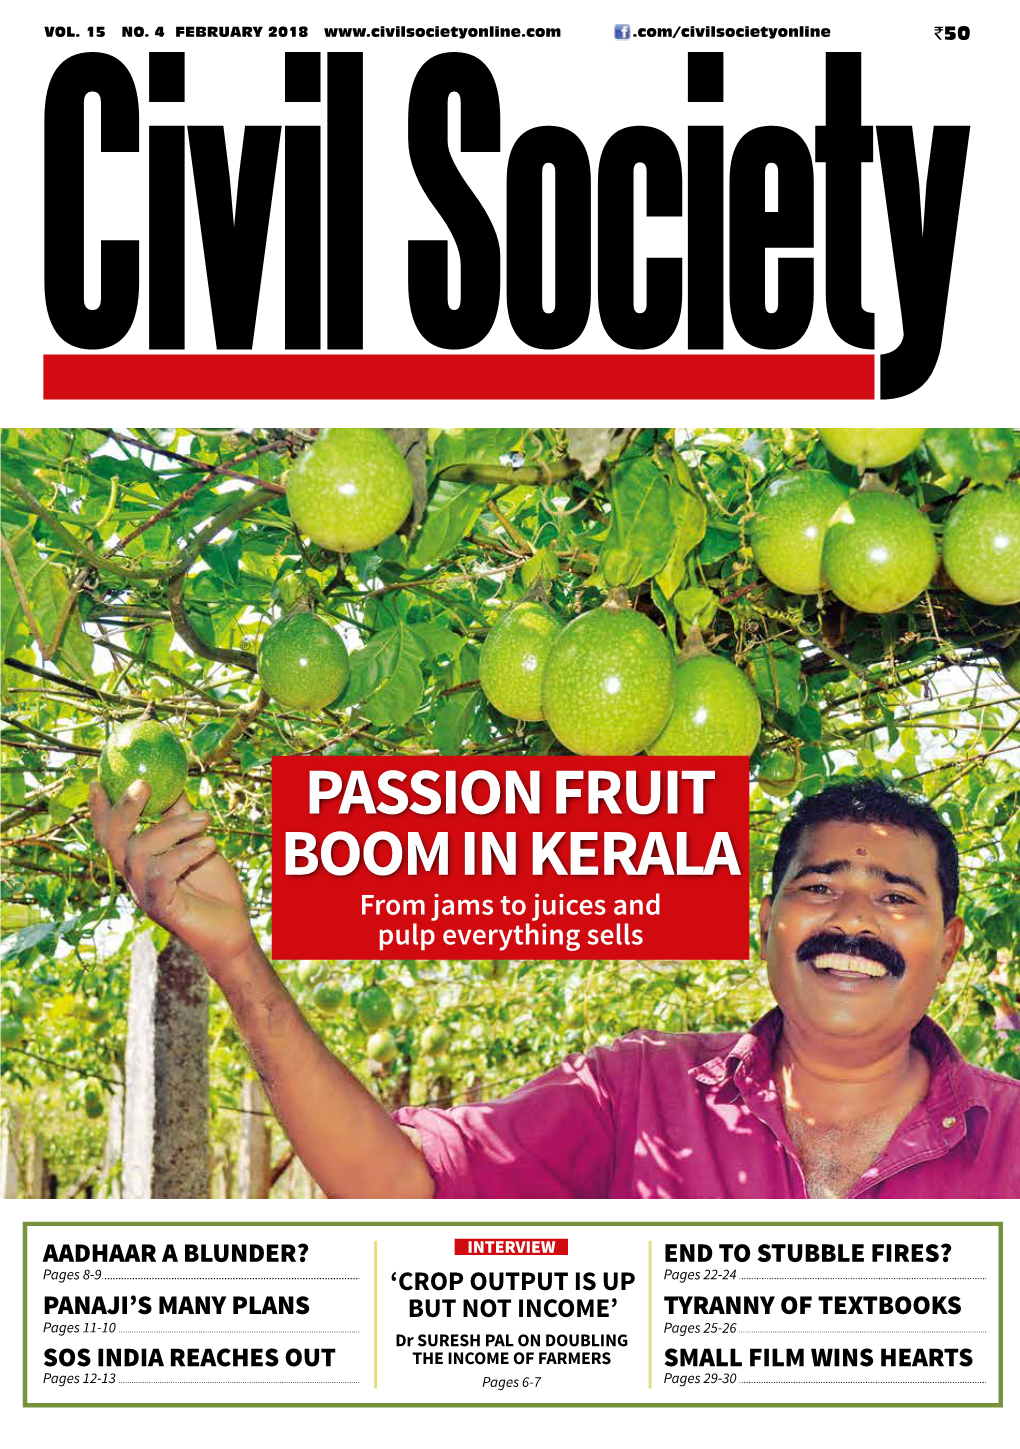 PASSION FRUIT BOOM in KERALA from Jams to Juices and Pulp Everything Sells